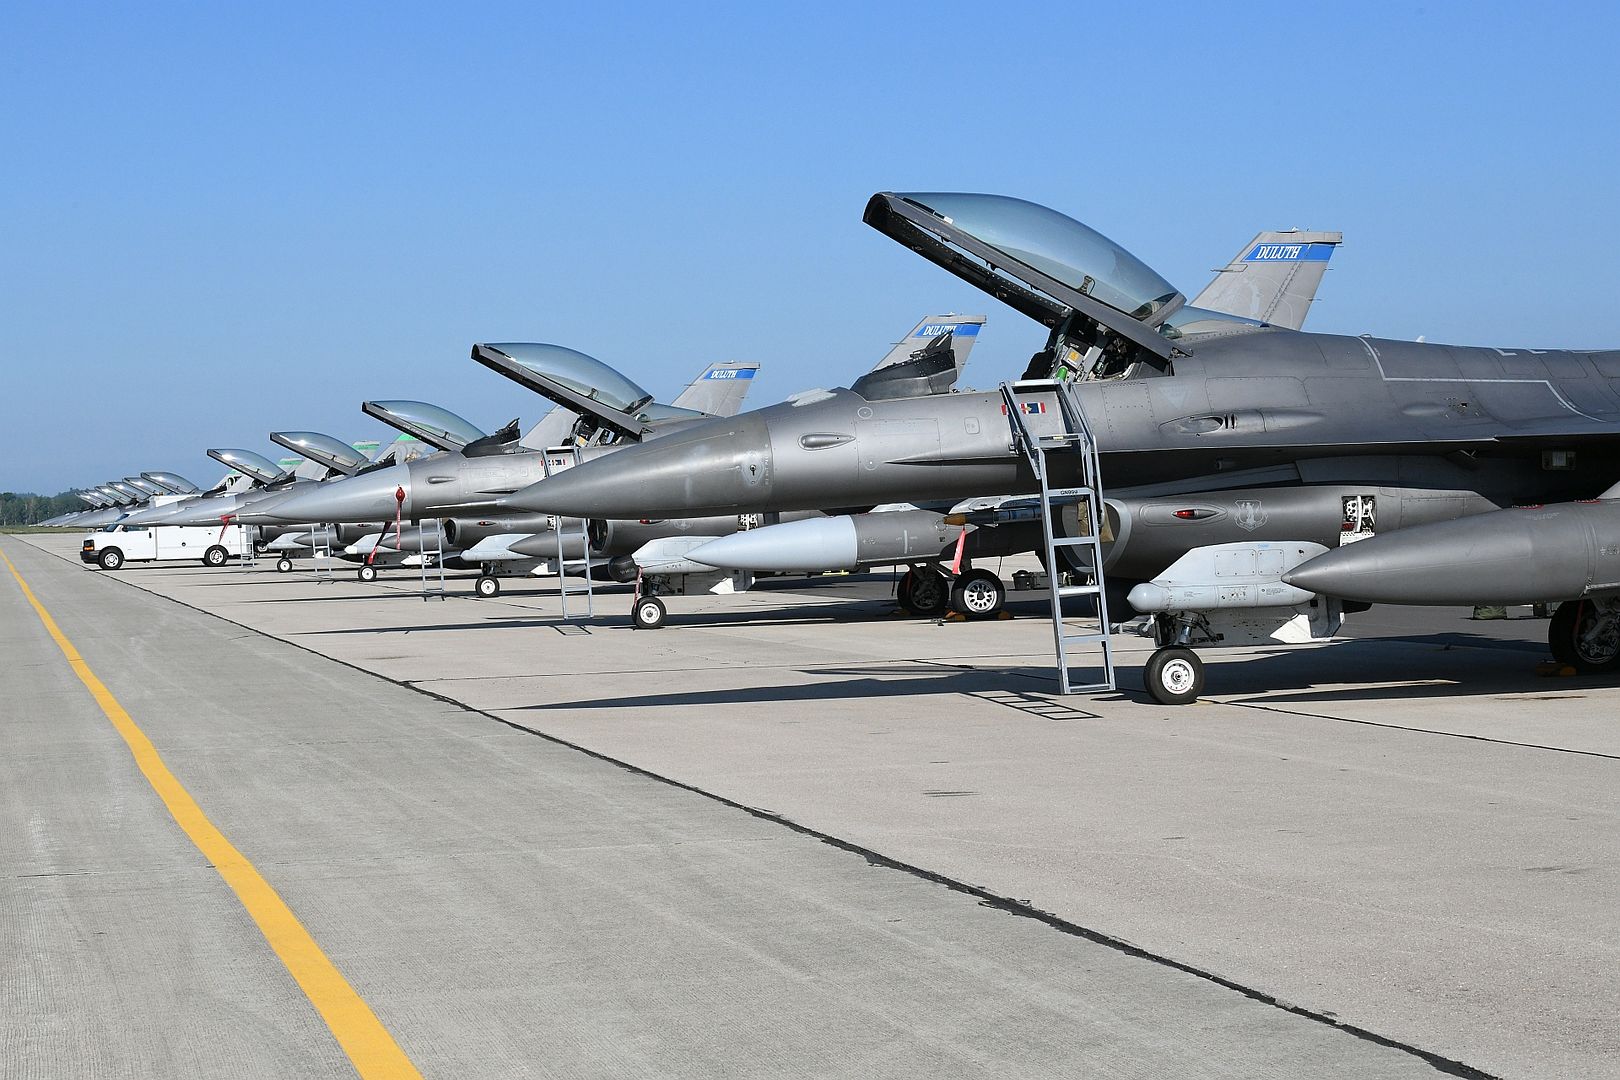 16 Fighting Falcons From The 148th Fighter Wing Minnesota Air National Guard And 180th Fighter Wing Ohio Air National Guard Are Lined Up At At Volk Field